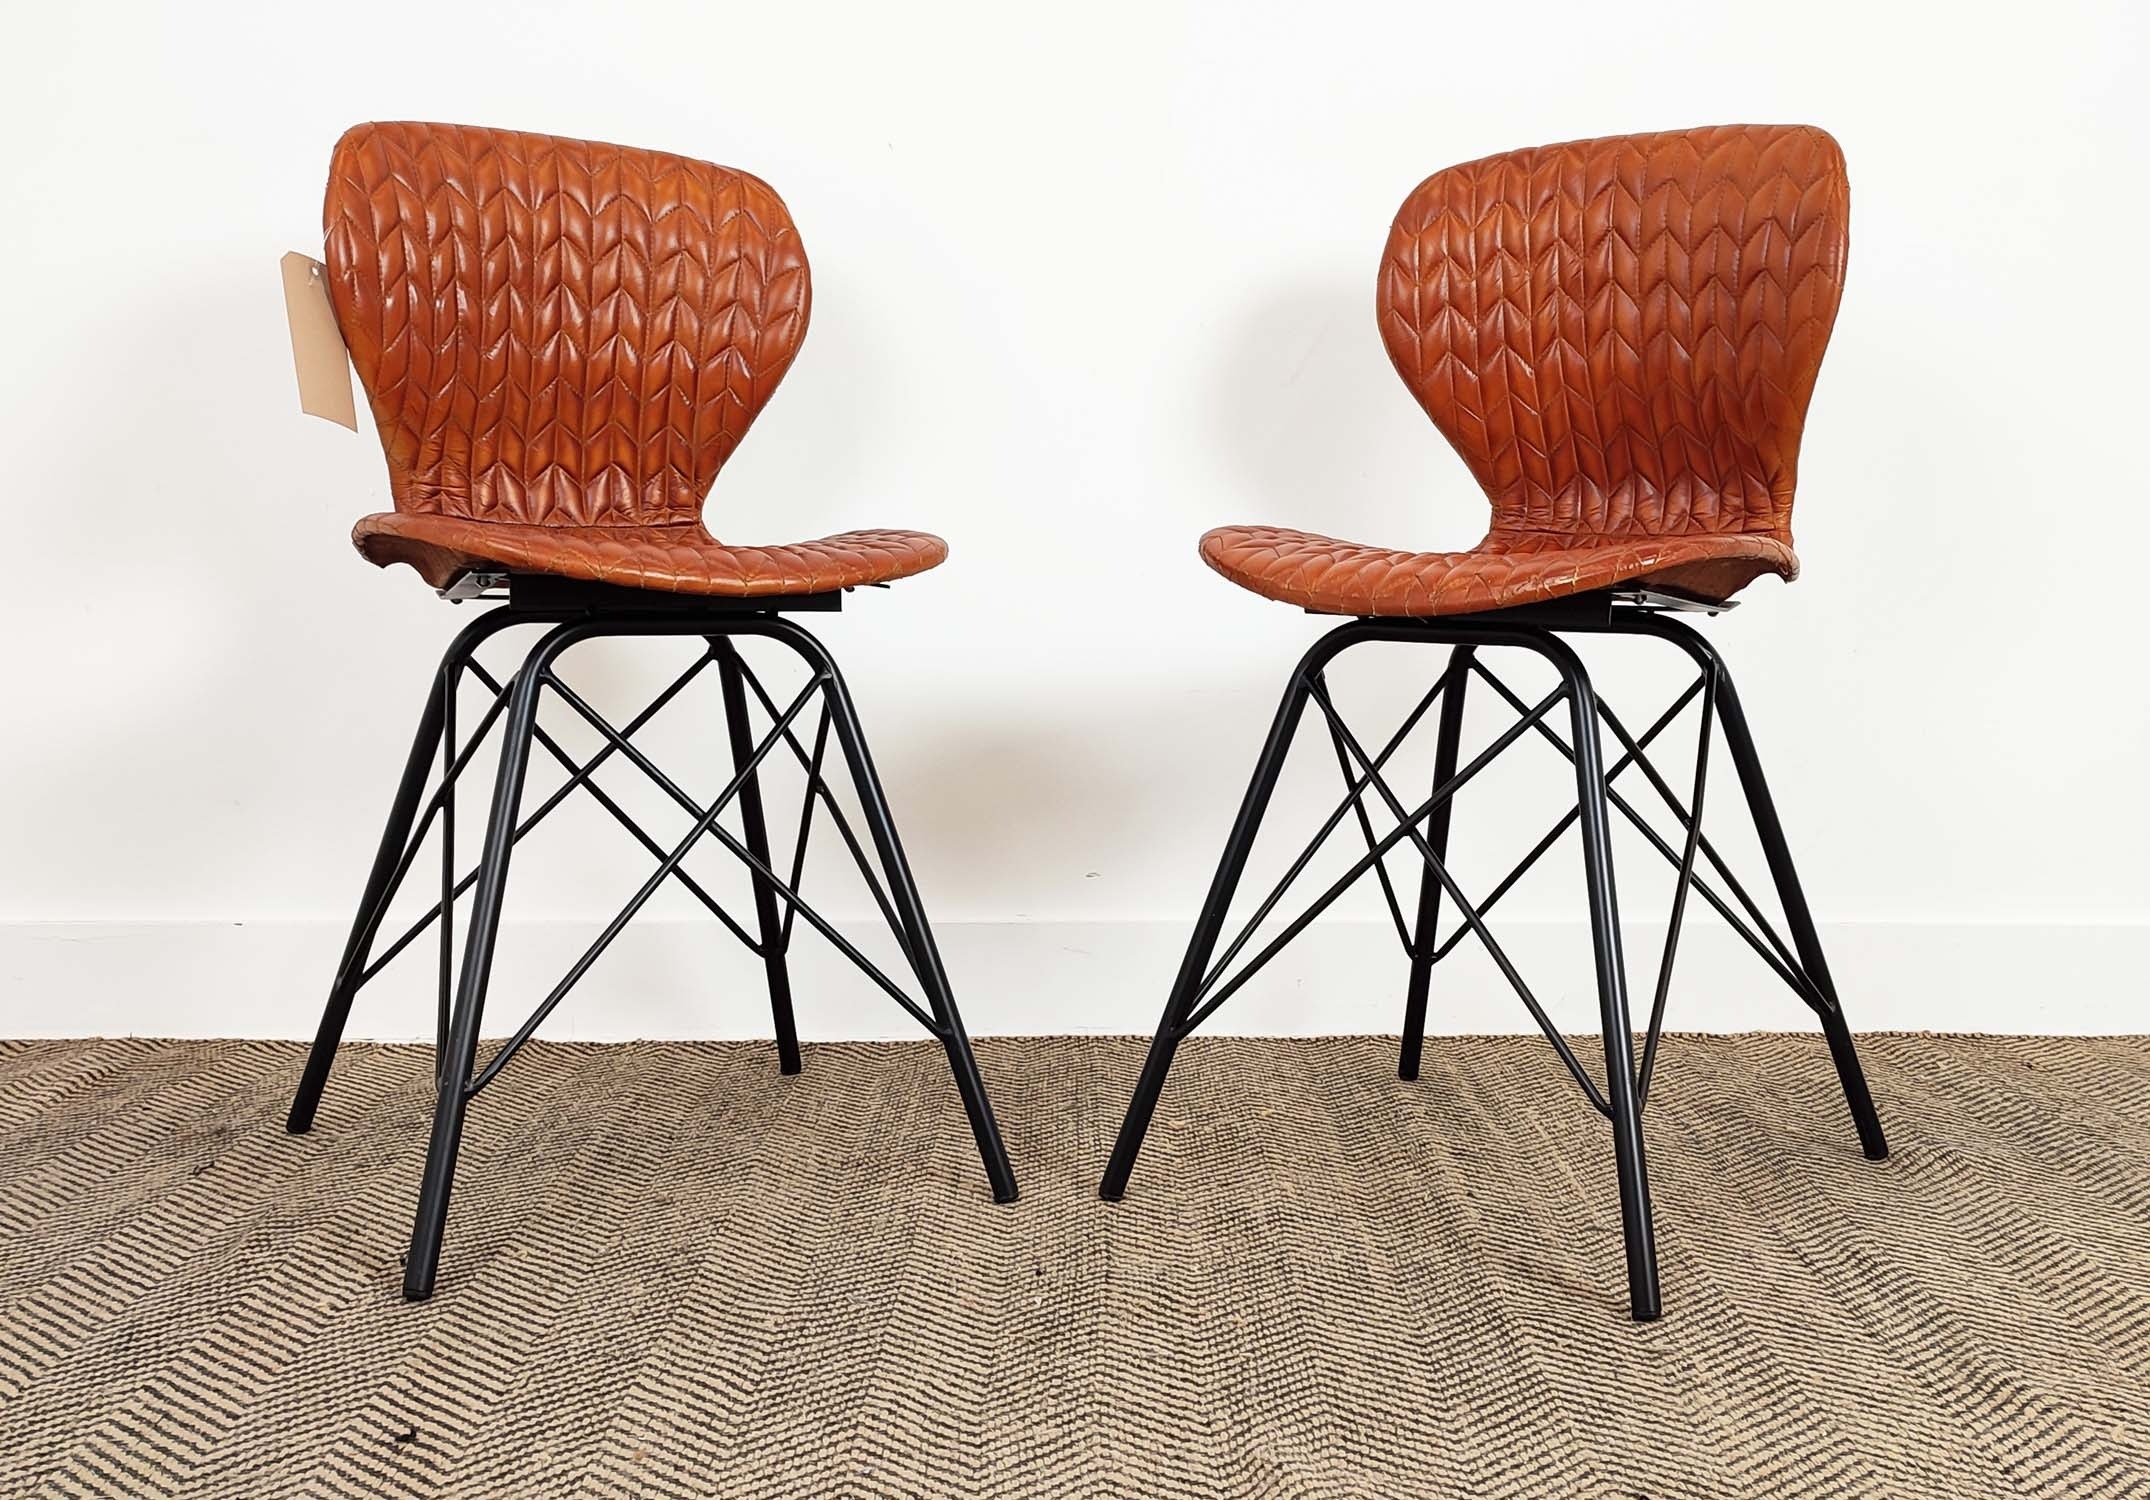 SIDE CHAIRS, a pair, stitched leather upholstery, 85cm H x 42cm W x 46cm D. (2) - Image 2 of 6